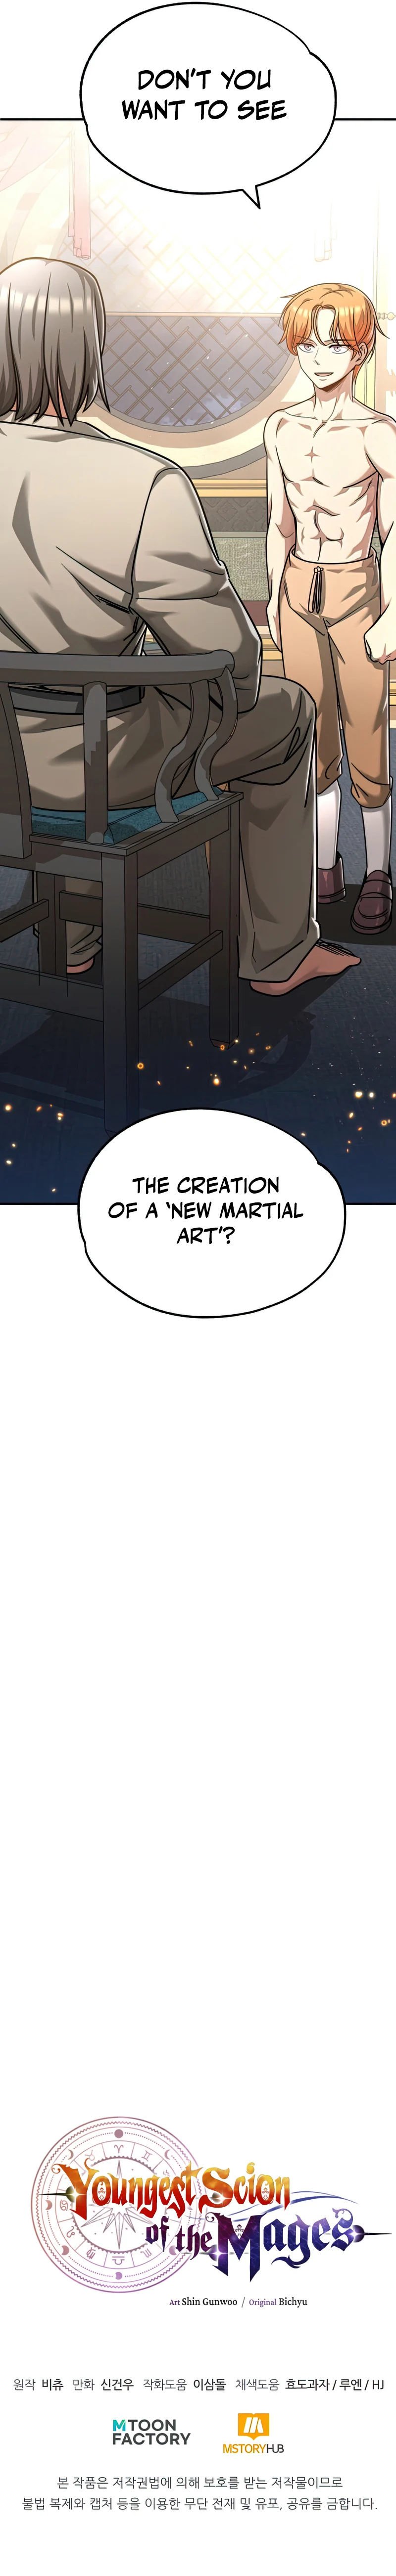 youngest-scion-of-the-mages-chap-32-9